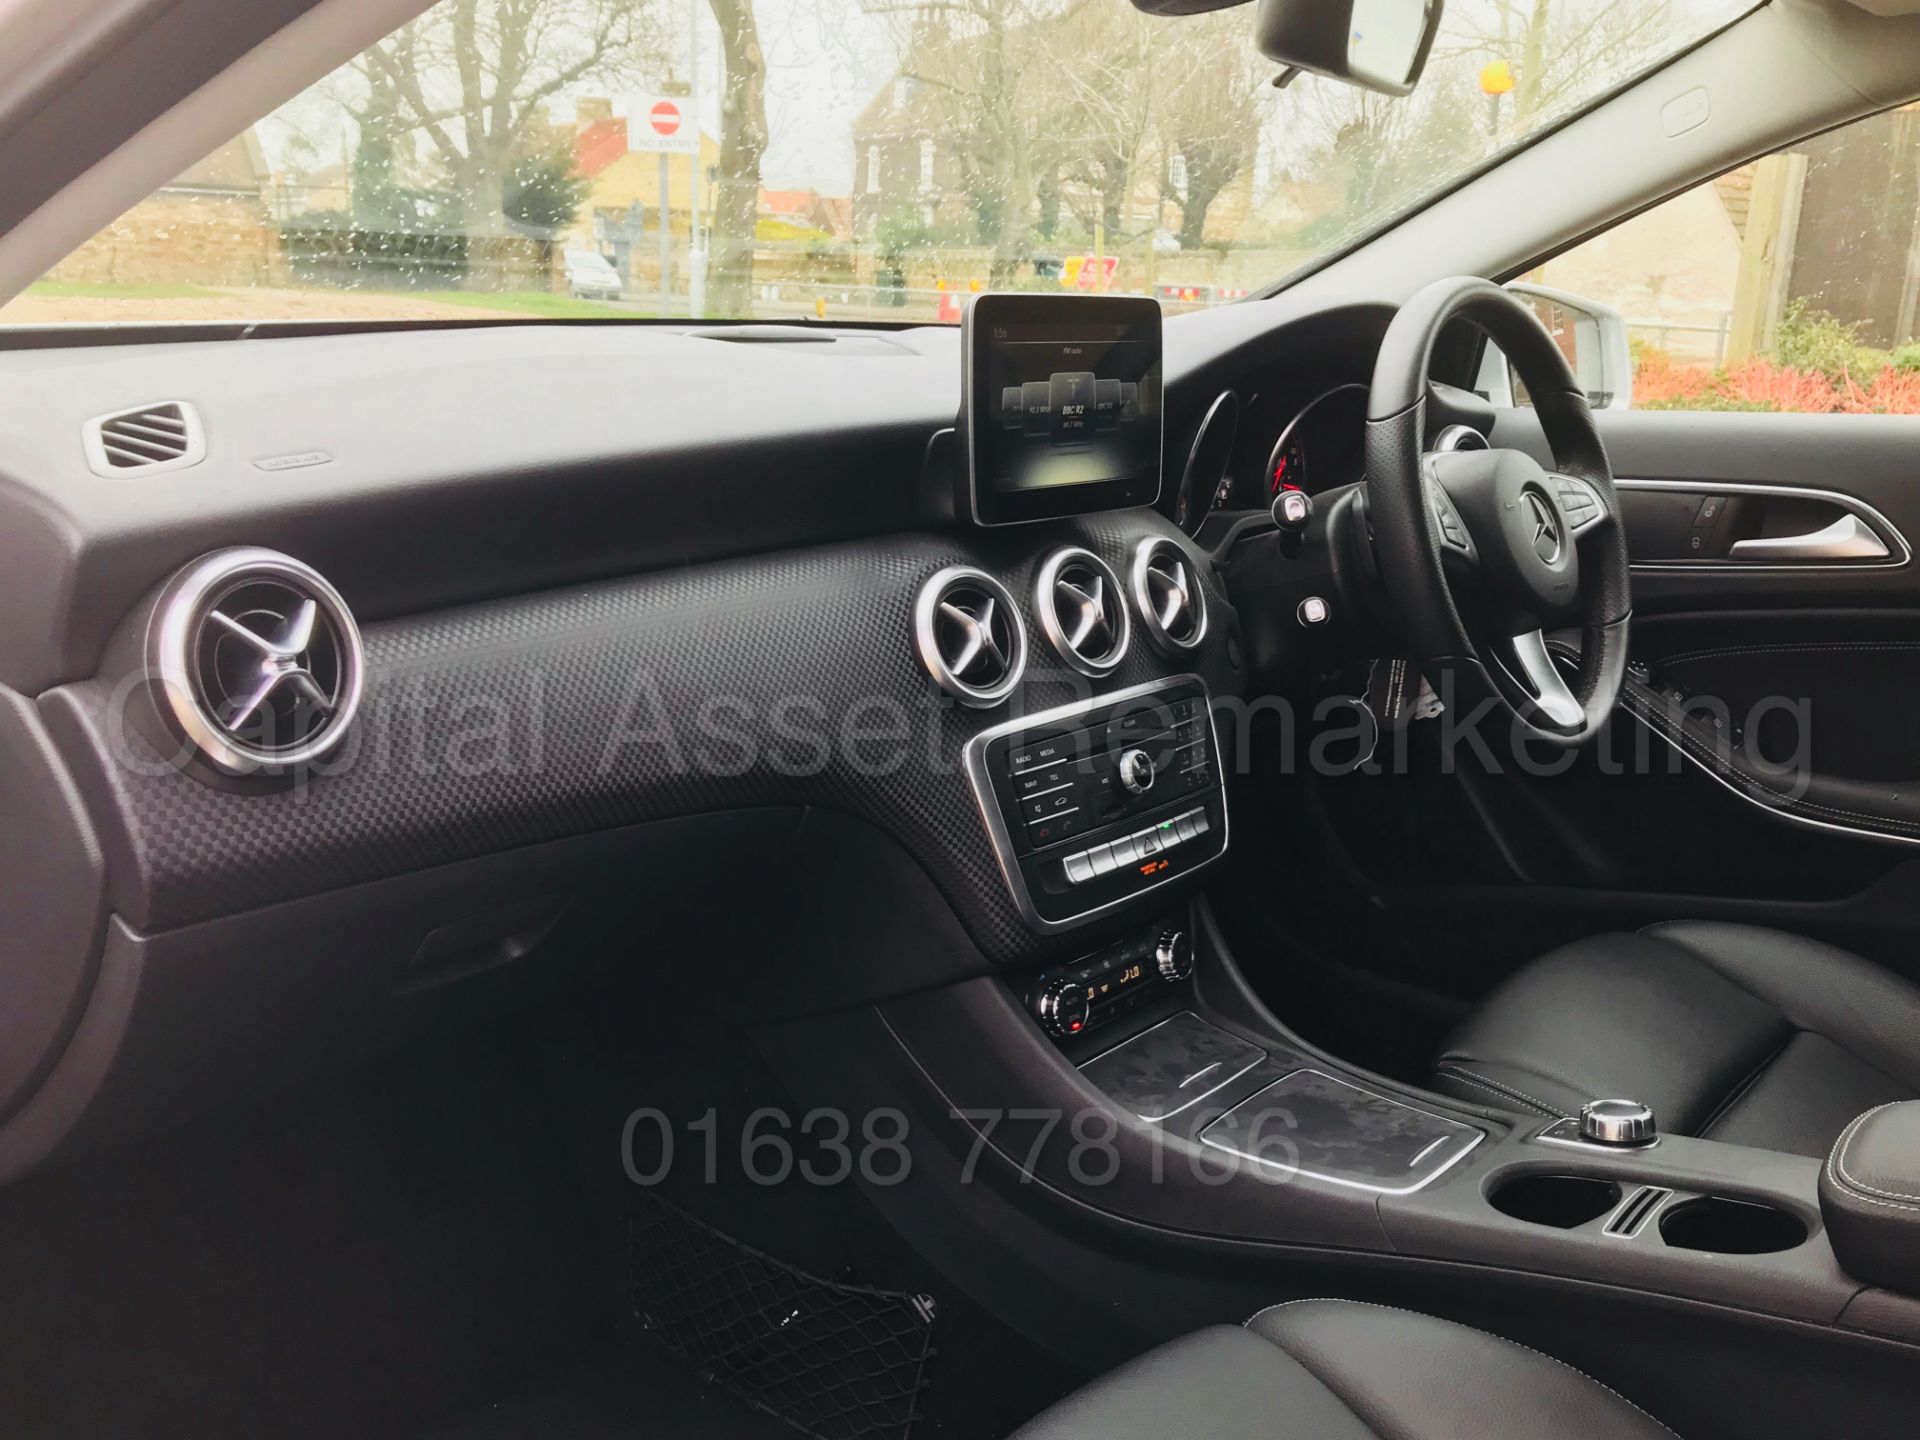 MERCEDES-BENZ A180D 'SPORT' (2017 MODEL) '7G TRONIC AUTO - LEATHER - SAT NAV' (1 OWNER FROM NEW) - Image 20 of 41